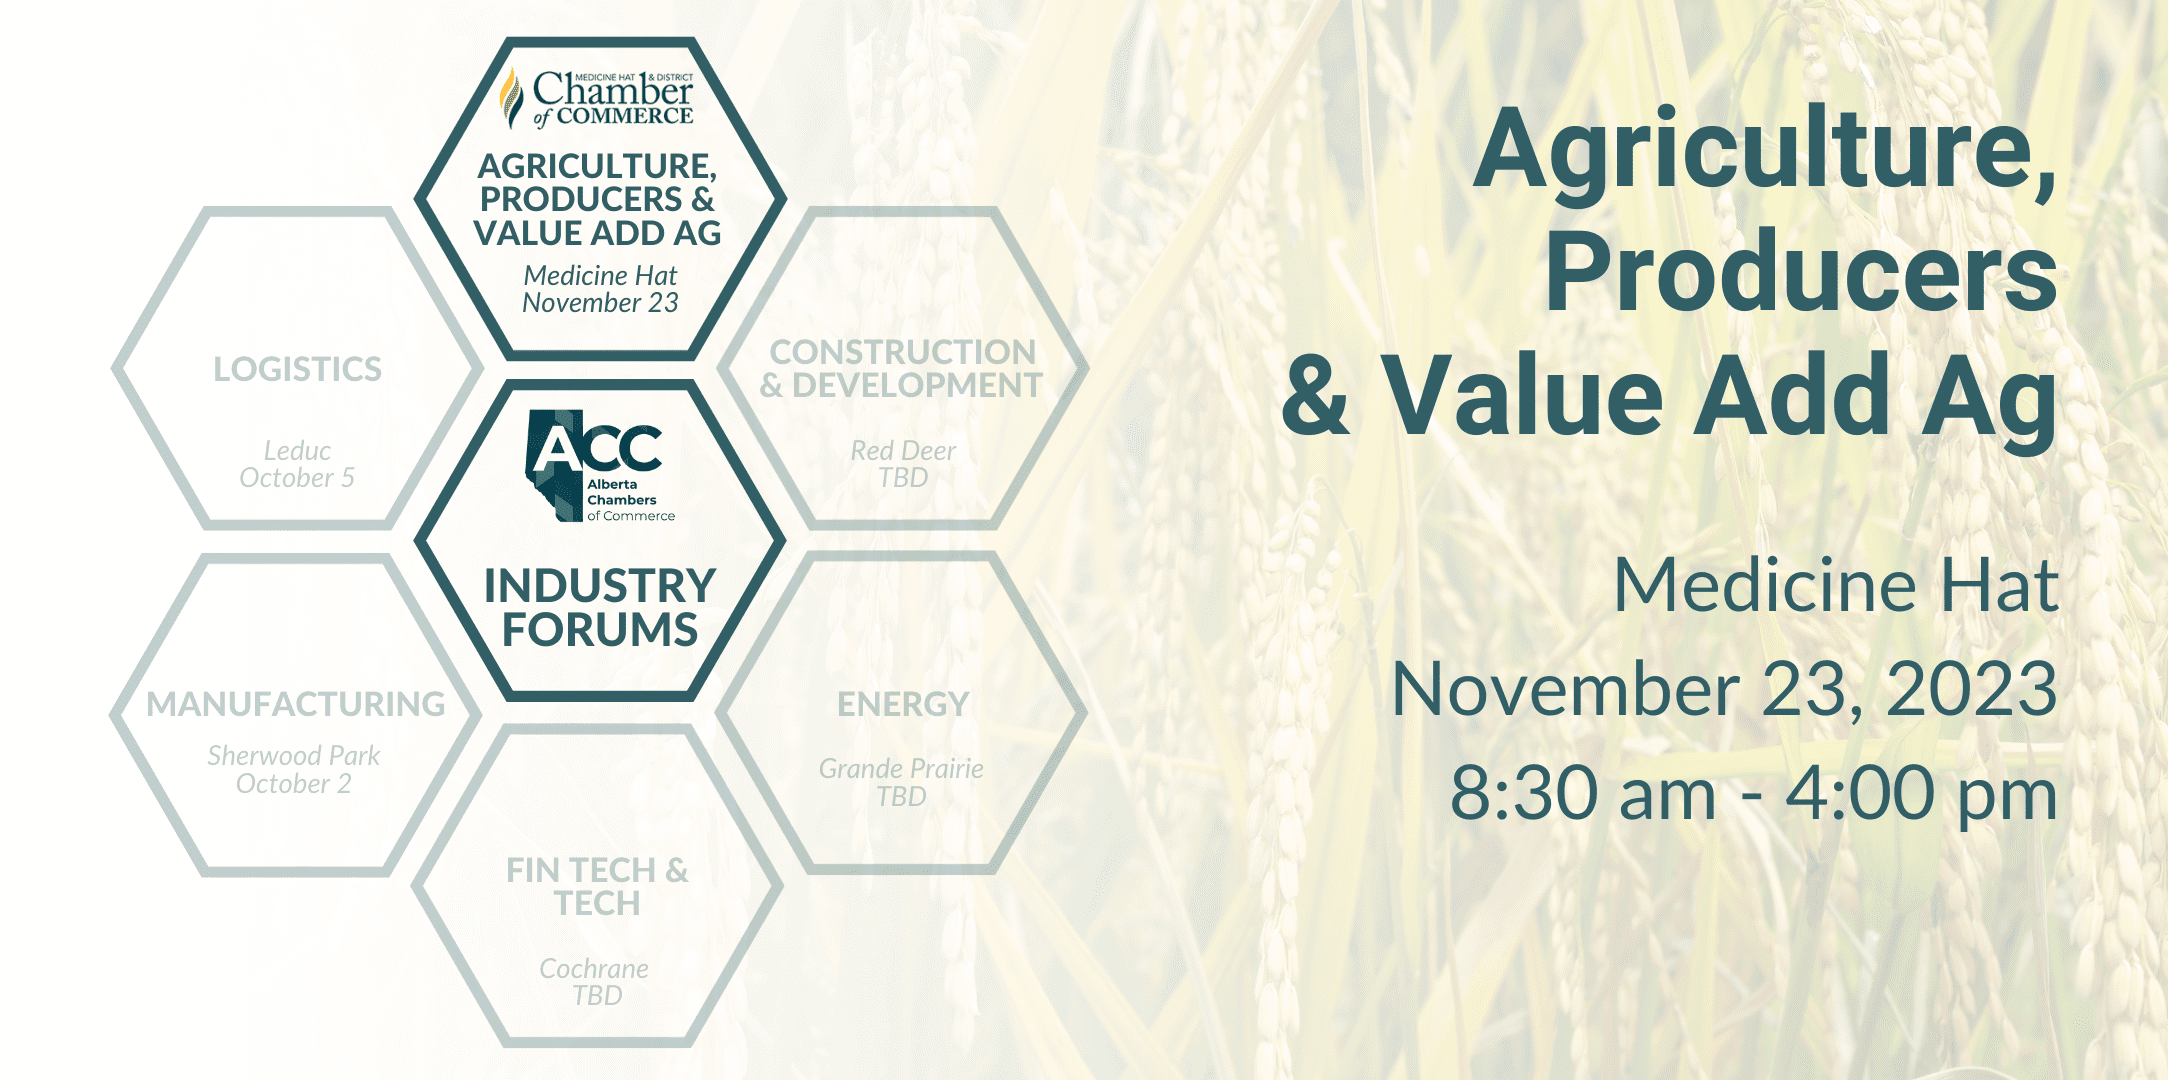 Agriculture, Producers & Value Add Ag Forum image